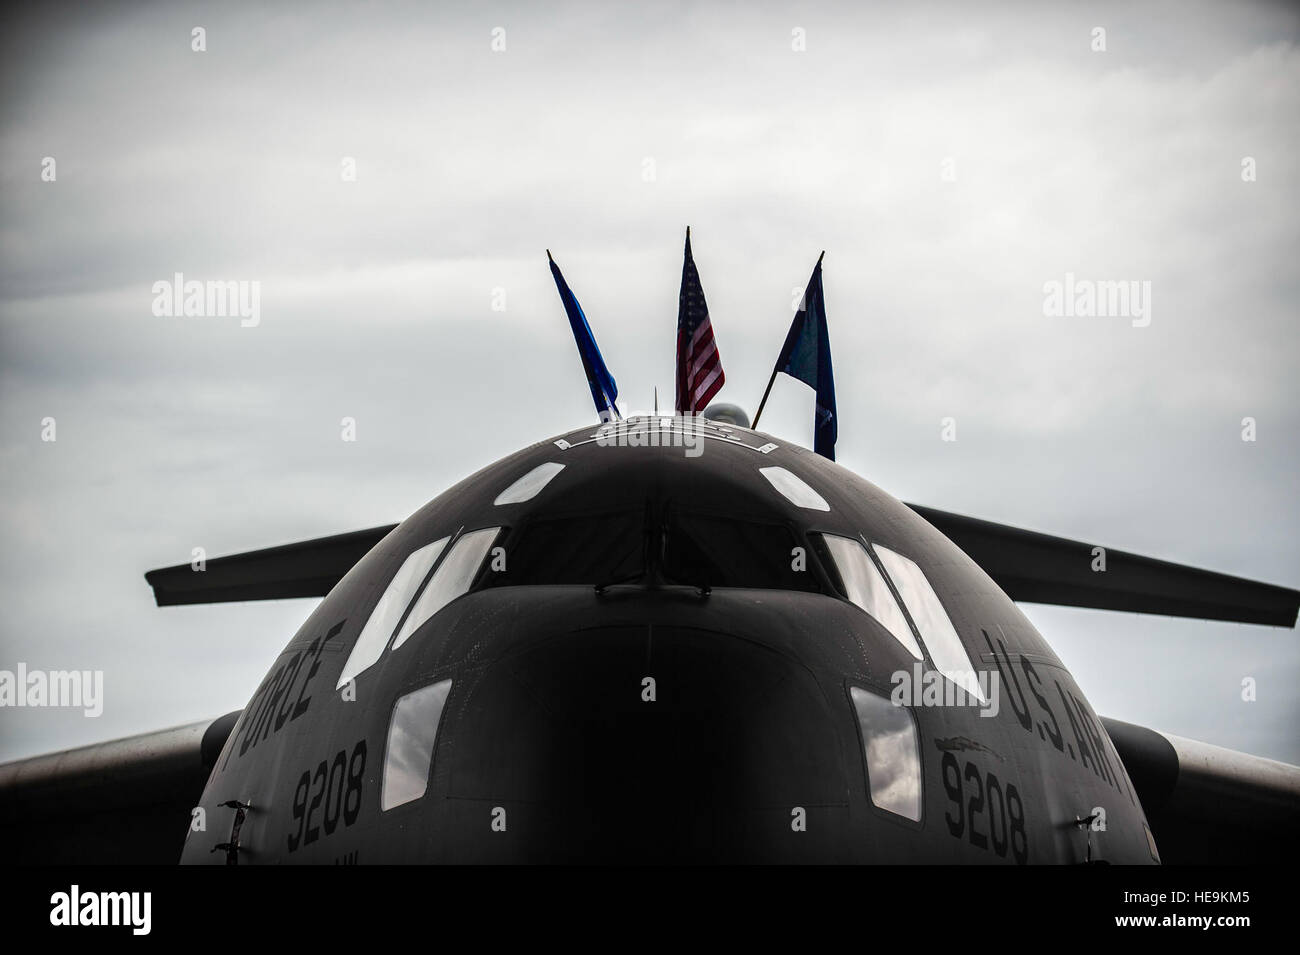 A C-17 Globemaster III is displayed during an inactivation ceremony for the 17th Airlift Squadron, June 25, 2015, at Joint Base Charleston, S.C. As part of the President’s Defense Budget for FY15, one of Charleston’s four active-duty C-17 flying squadron inactivated. The 17th AS was reactivated July 14, 1993 and was the first operational C-17 squadron.  Senior Airman Jared Trimarchi) Stock Photo